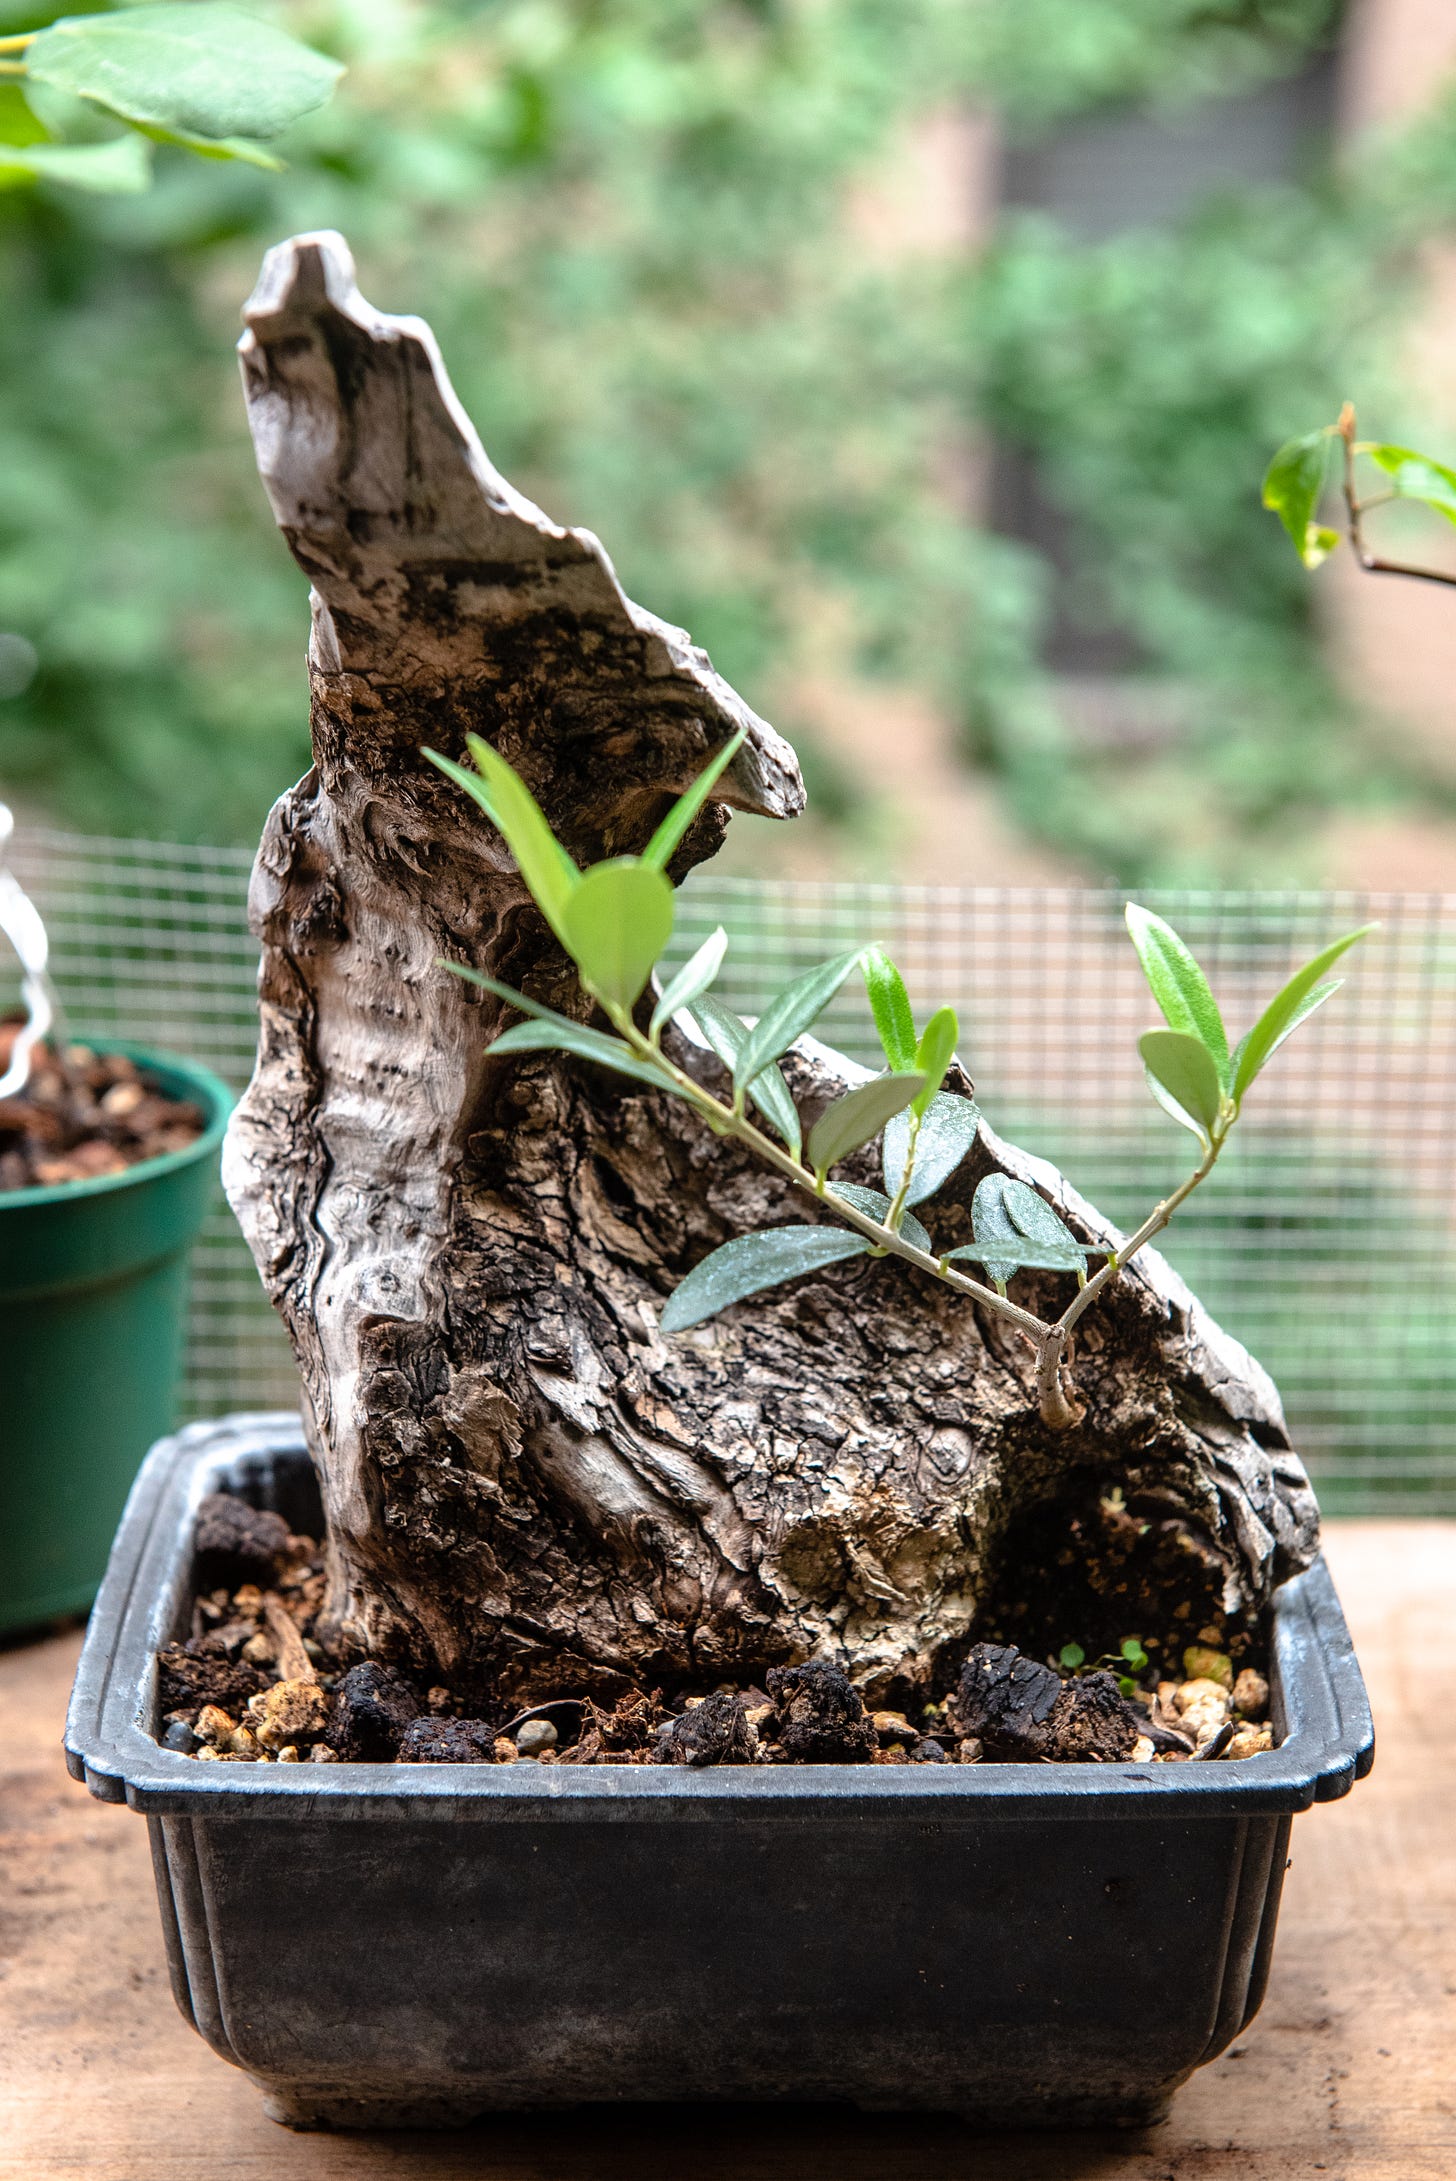 Image description: Photo of my olive bonsai, which is a large shard of old gnarled stump with a small single branch sticking out with new growth. End image description.